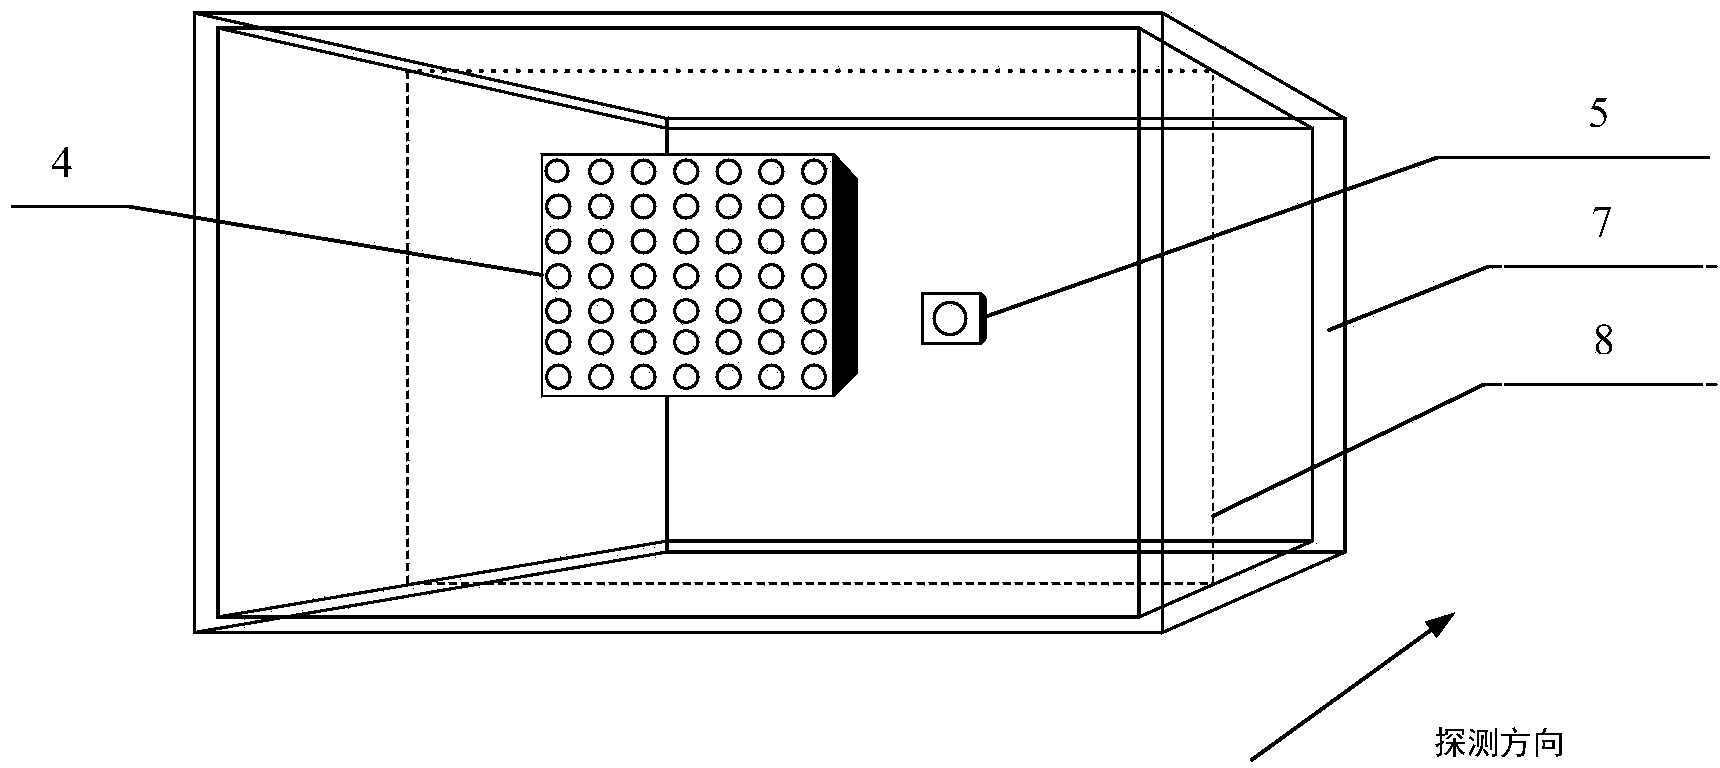 High-resolution through-wall imaging system and method based on random antenna arrays and microwave correlated imaging principles